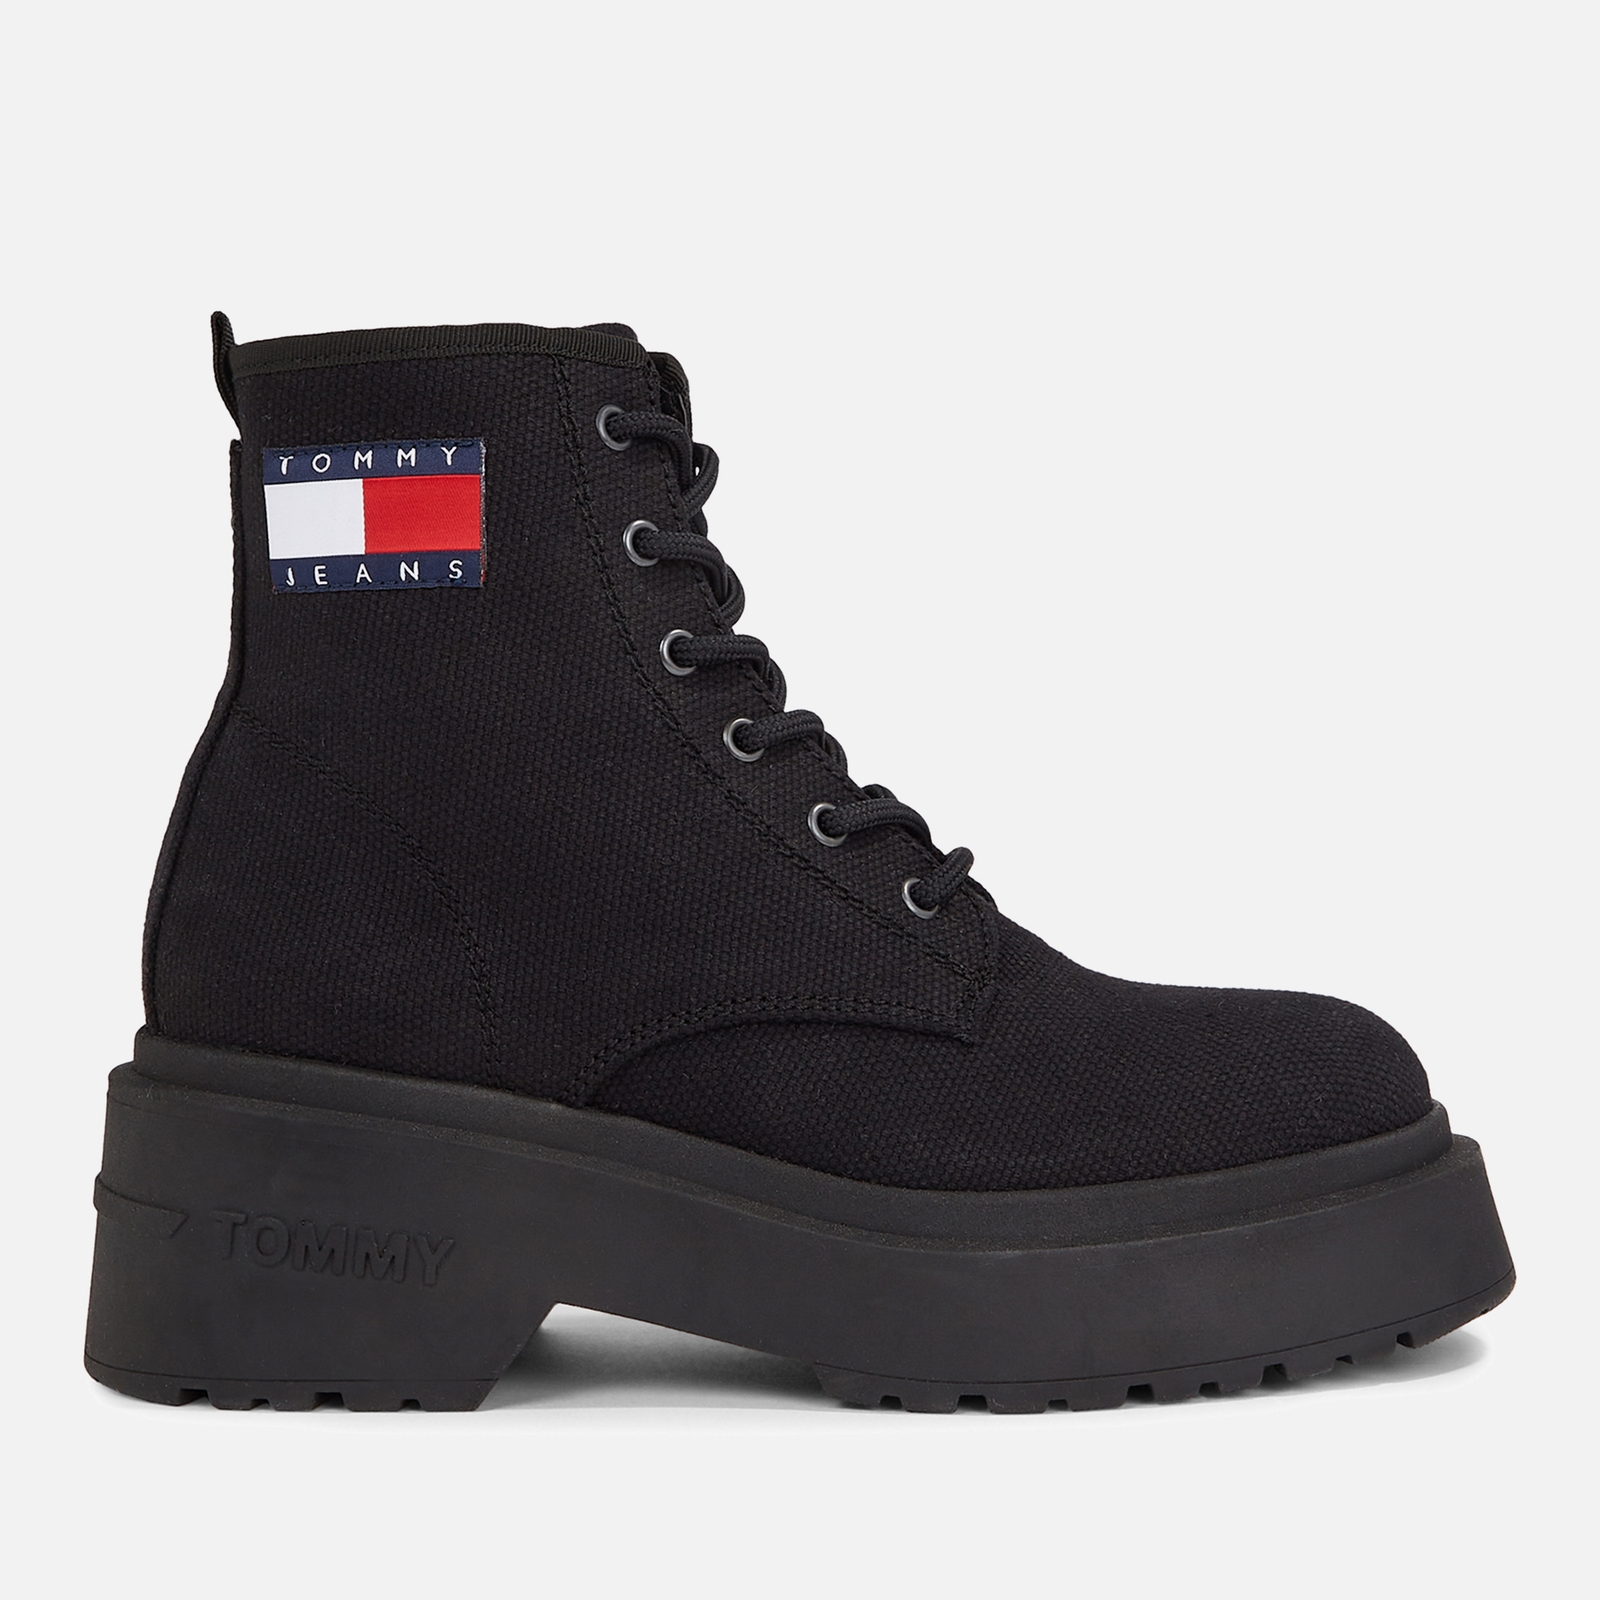 Tommy Jeans Women’s Canvas Mid Boots